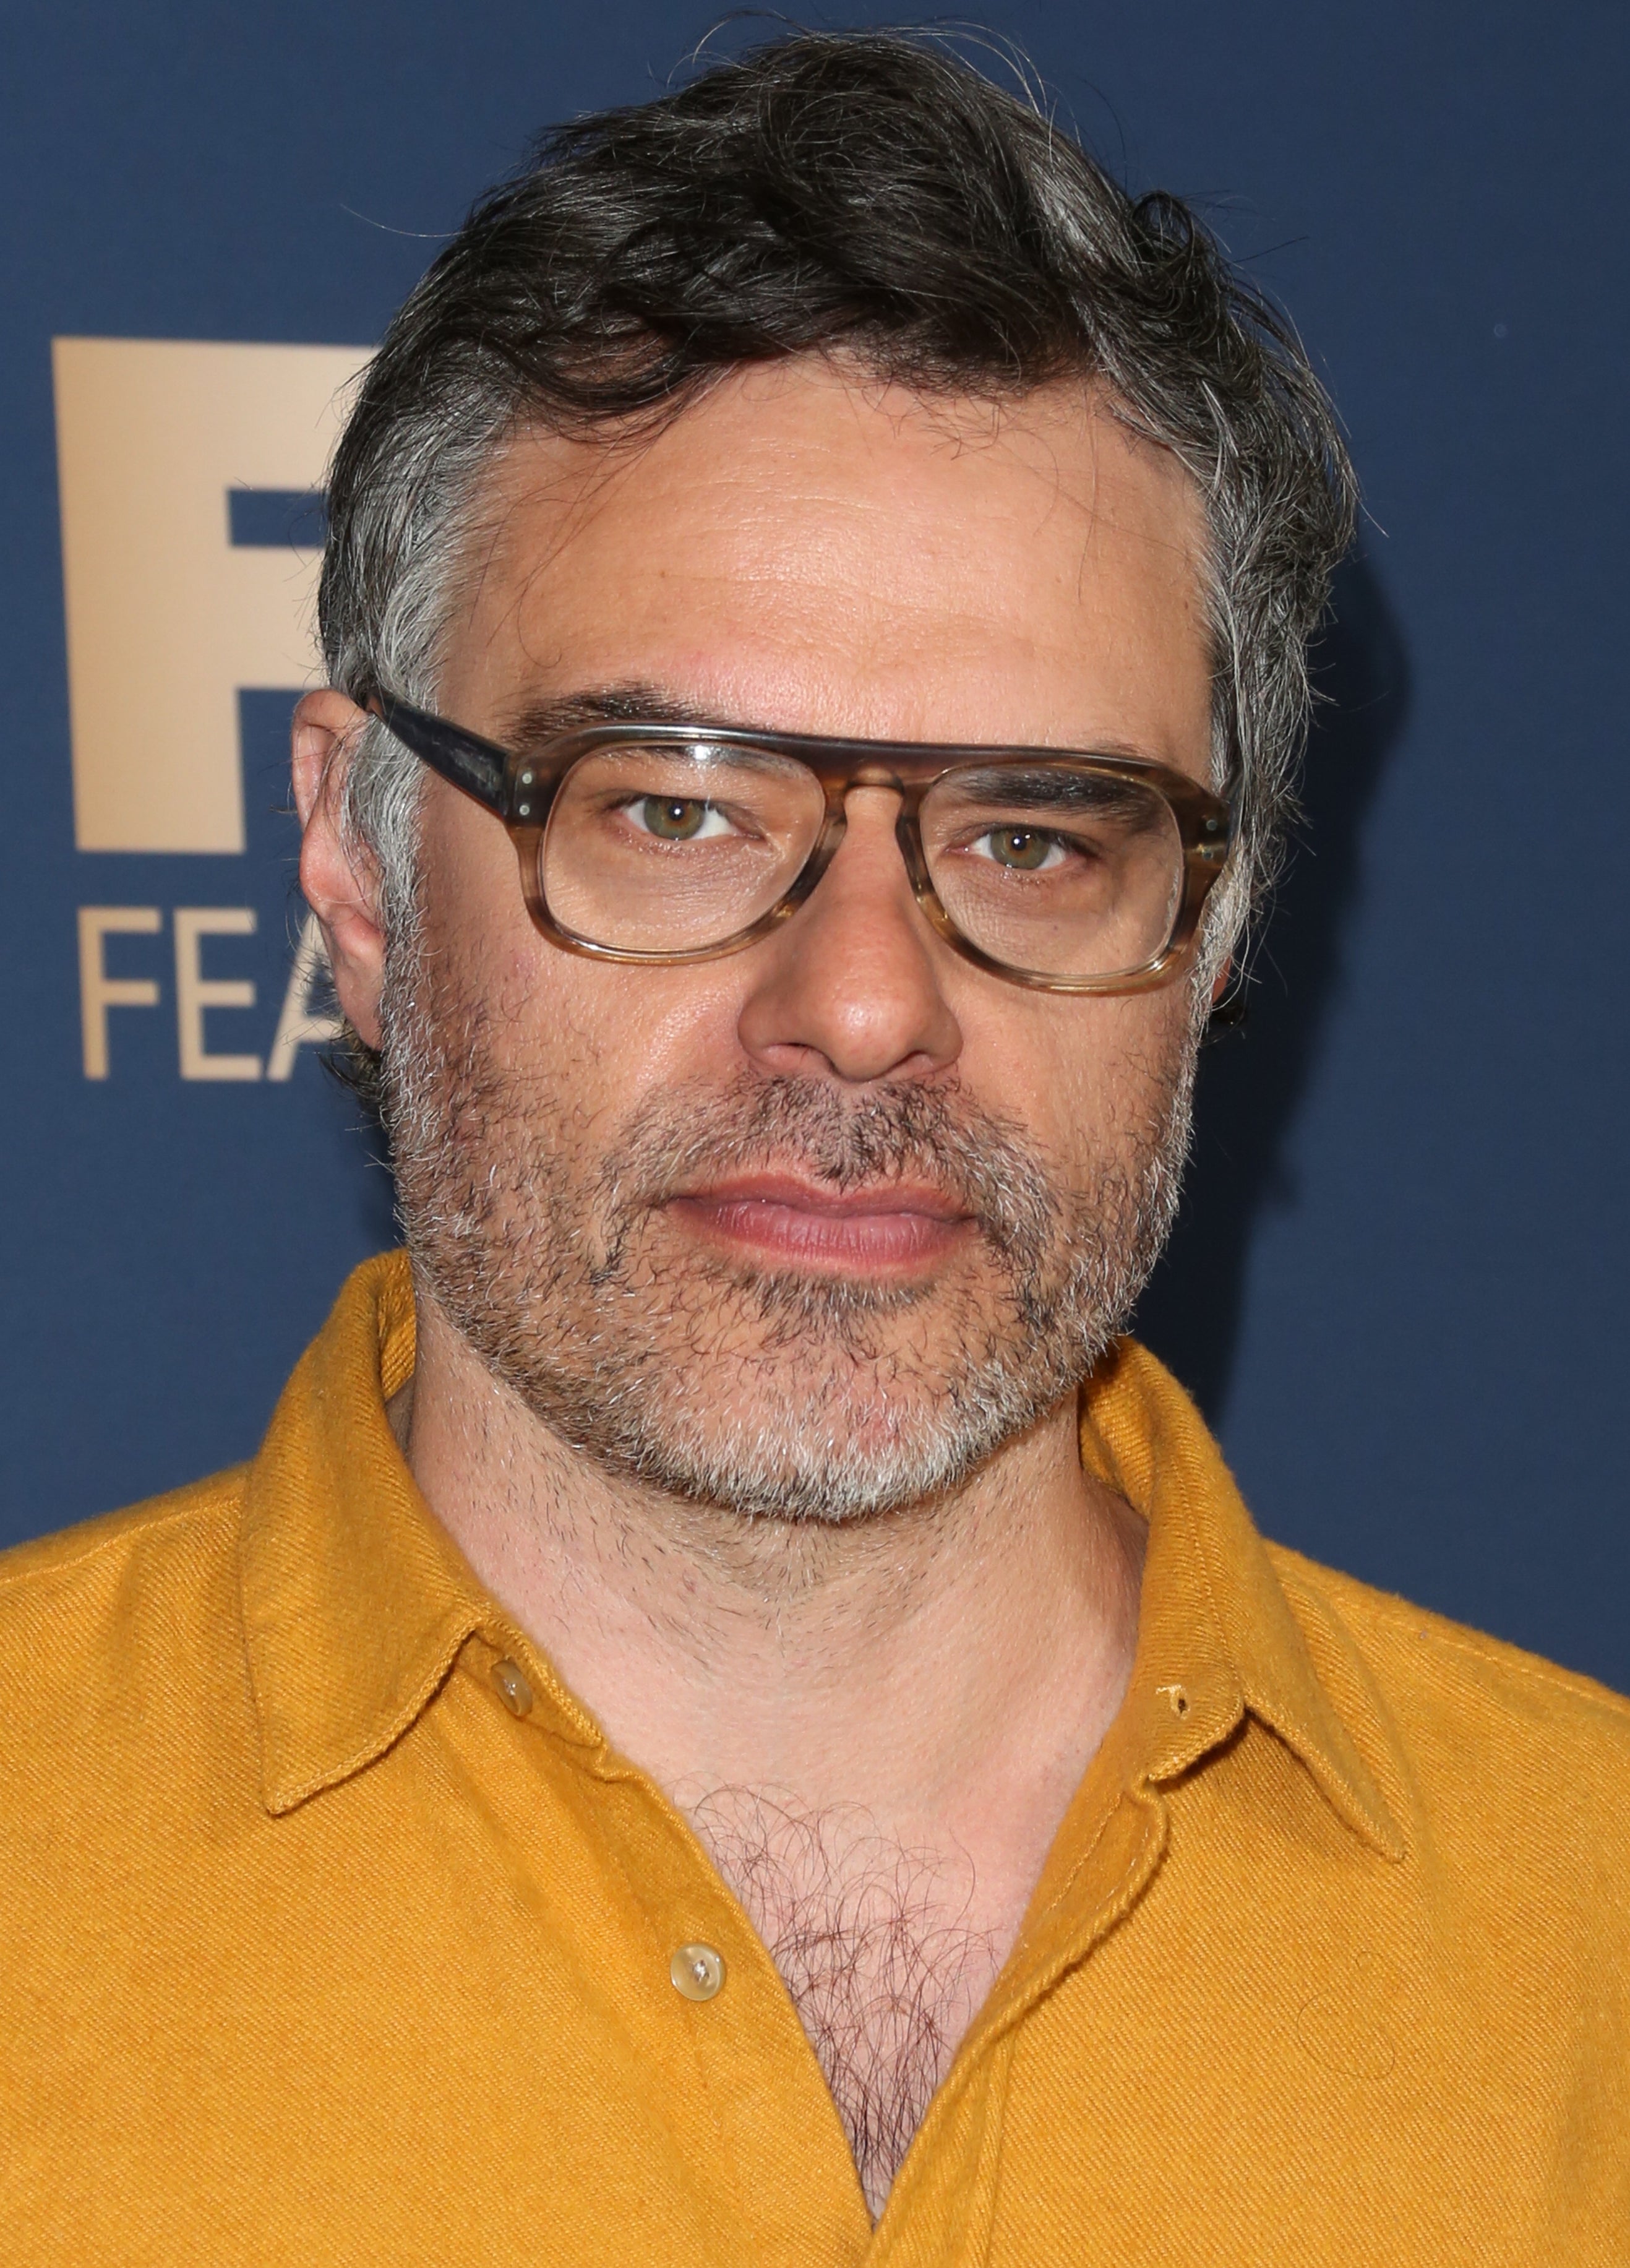 Jemaine Clement at the FX Star Walk Winter Press Tour